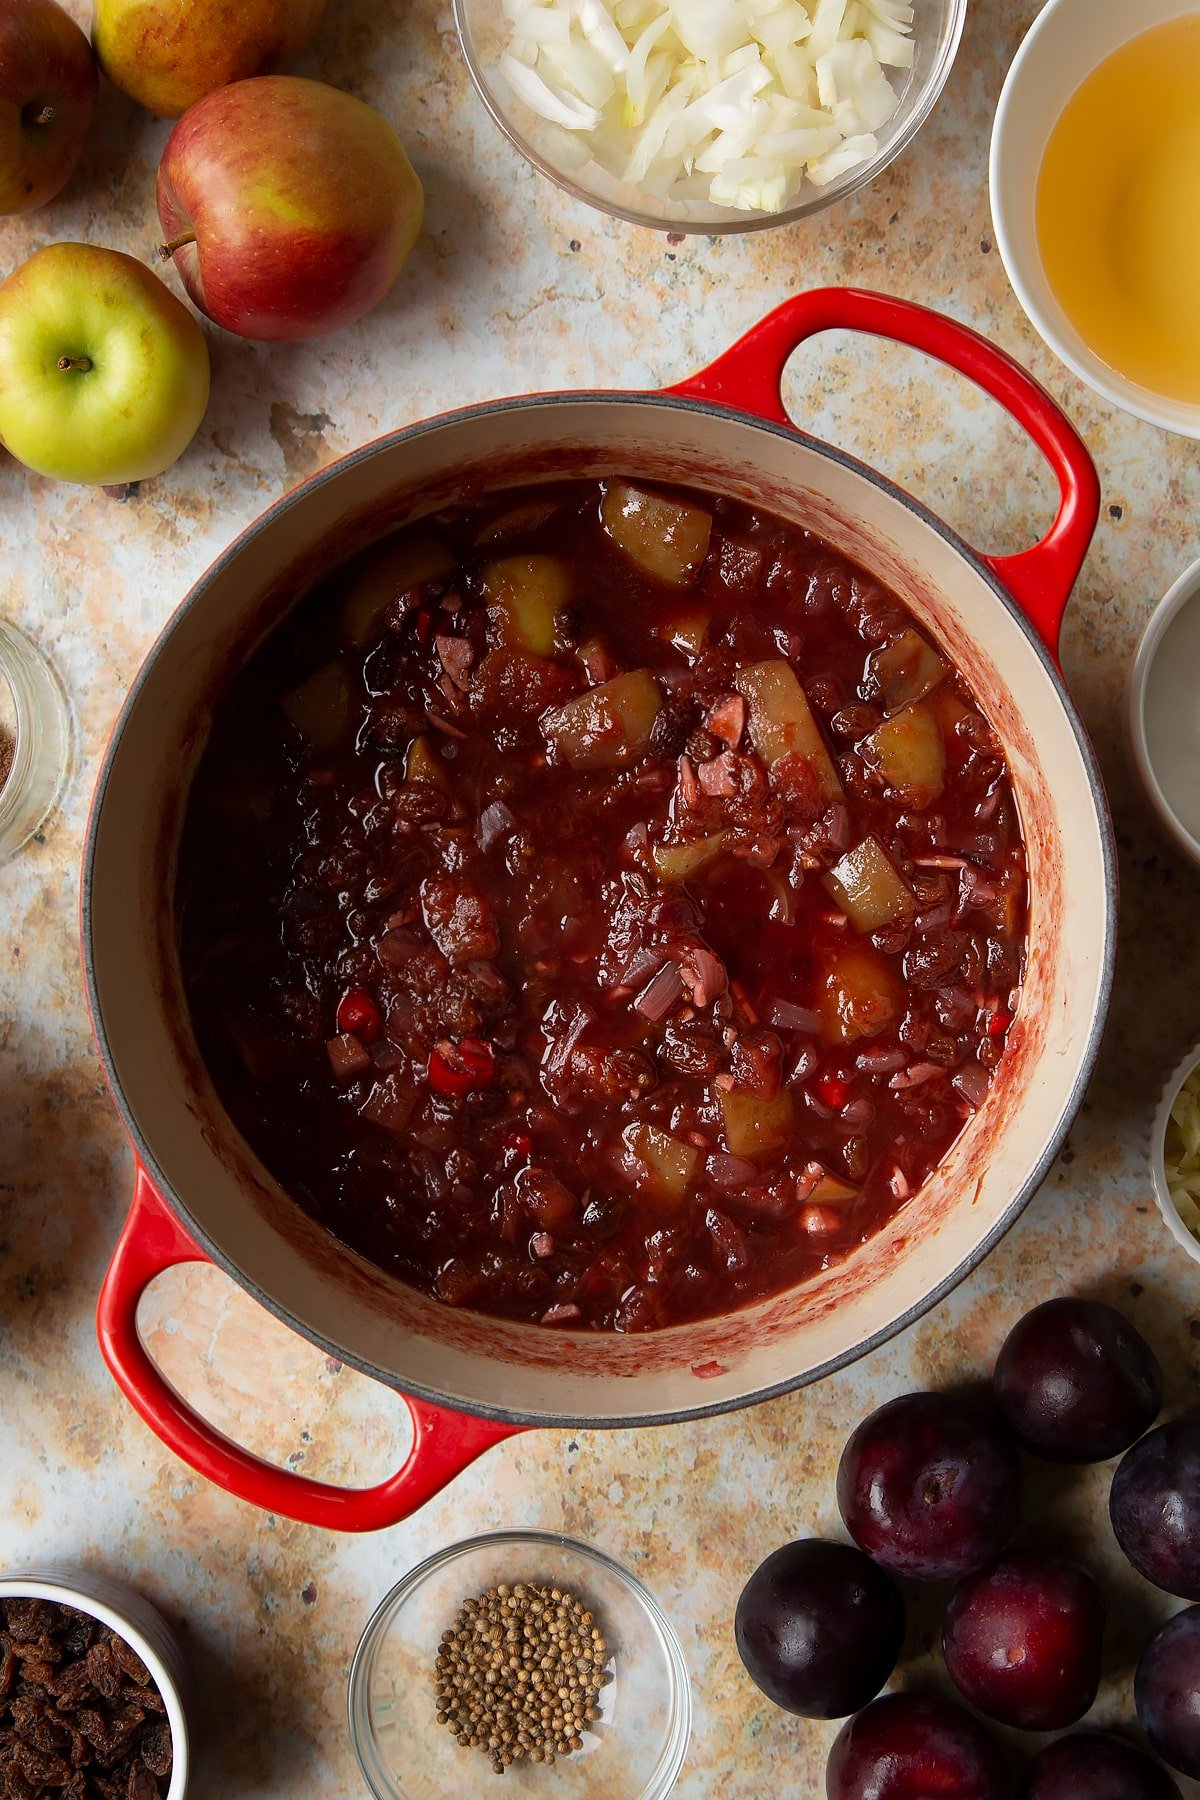 Almost cooked fruit chutney in a large pan. Ingredients to make a fruit chutney recipe surround the pan.